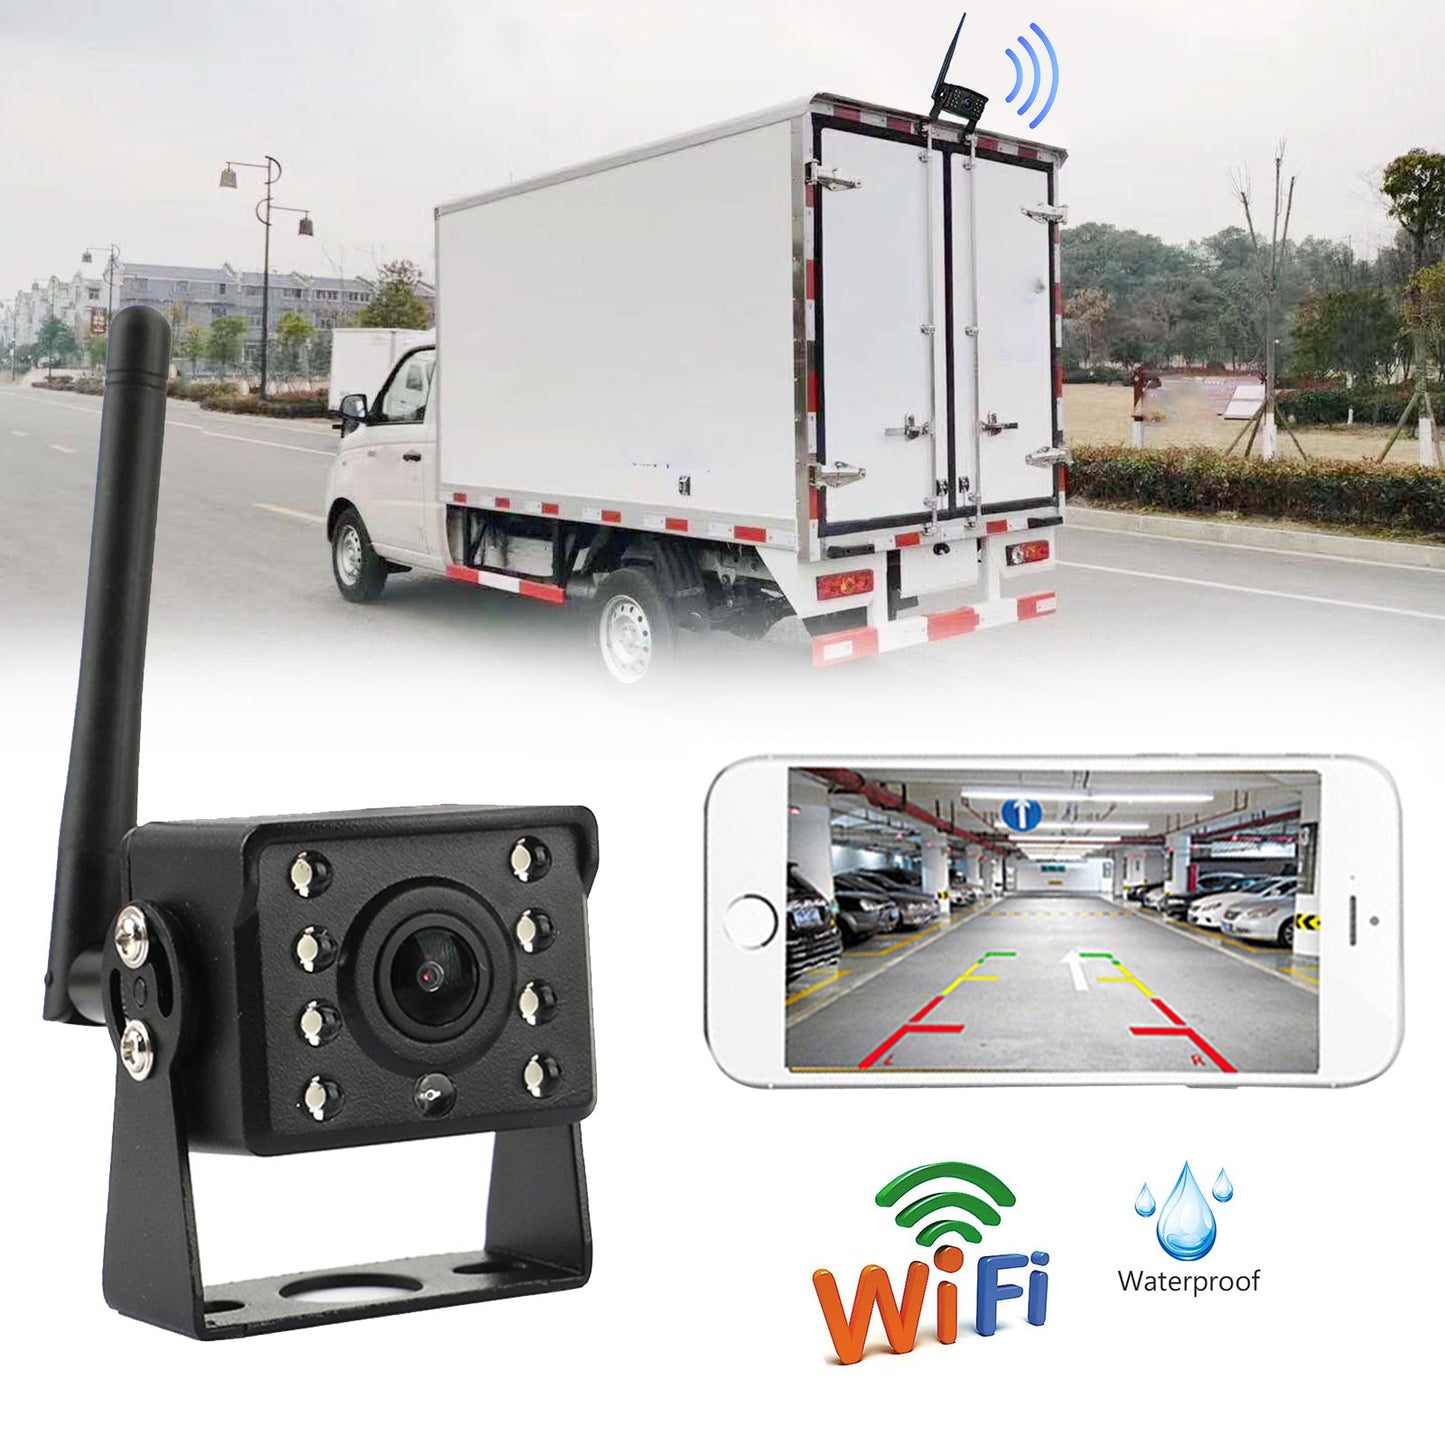 WiFi Wireless Car Truck RV Trailer Rear View Backup Camera CCTV For iOS Android